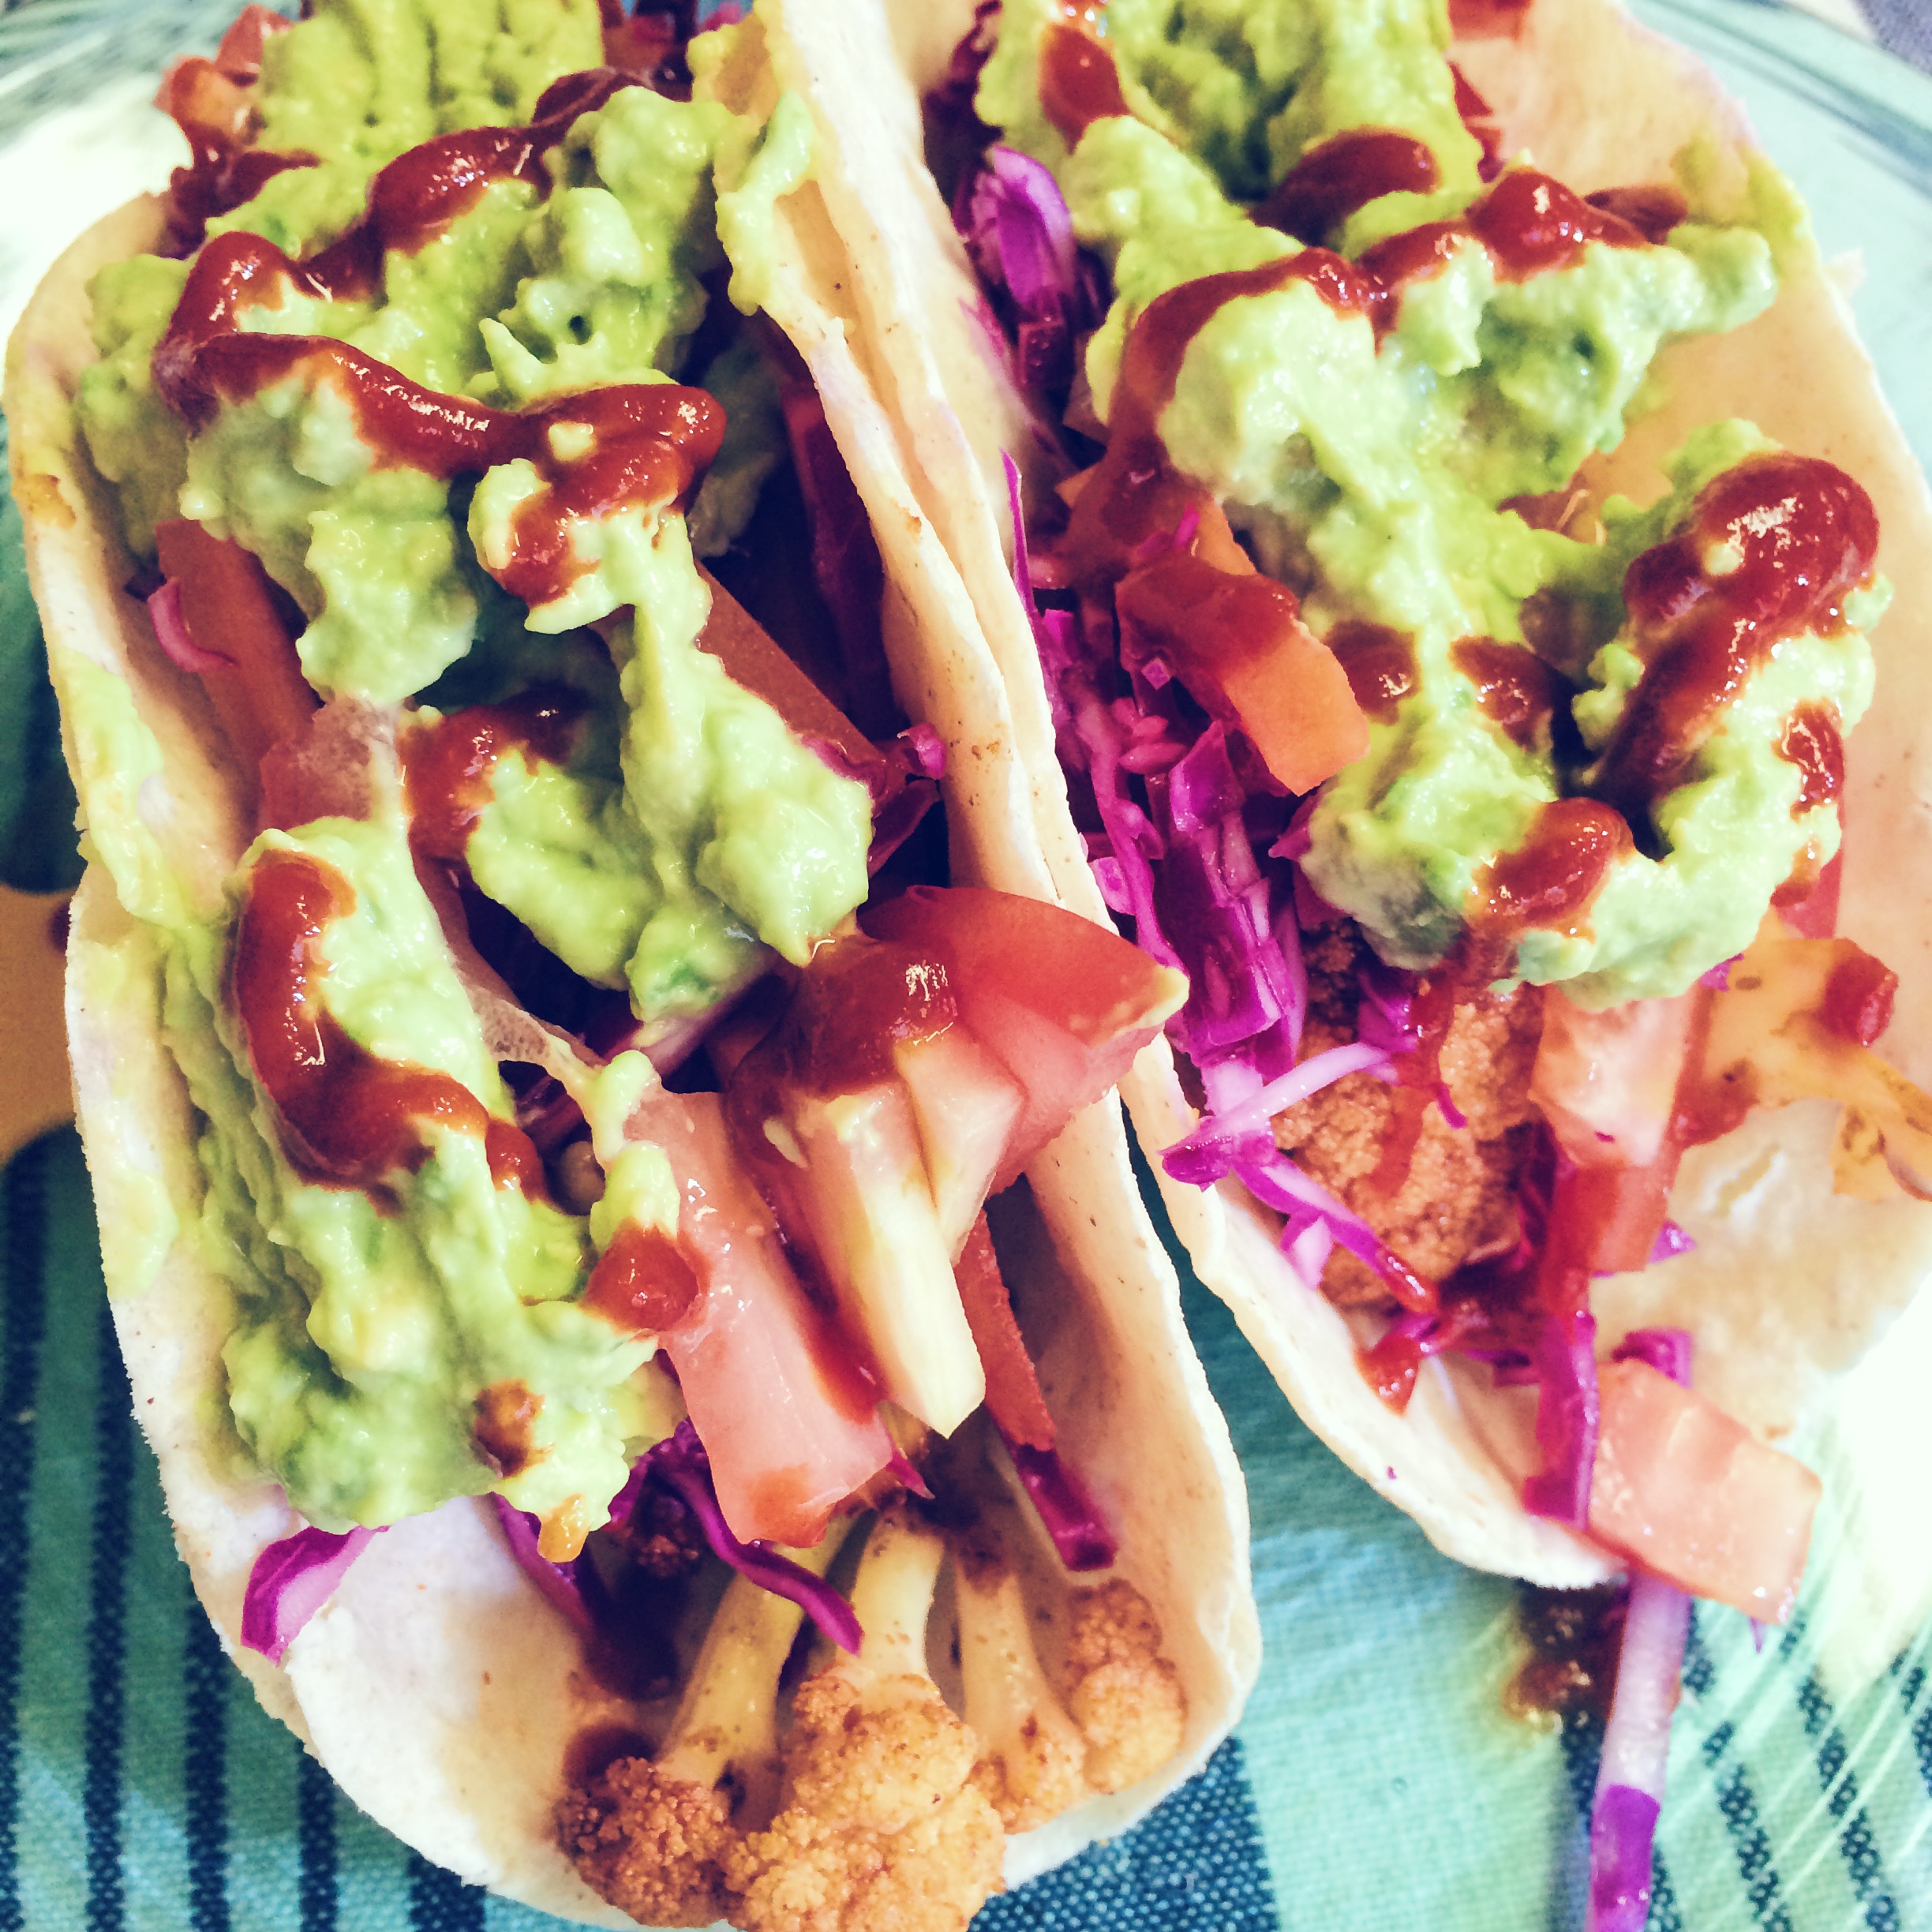 Review of the Thug Kitchen Beer Battered Sriracha Cauliflower Tacos